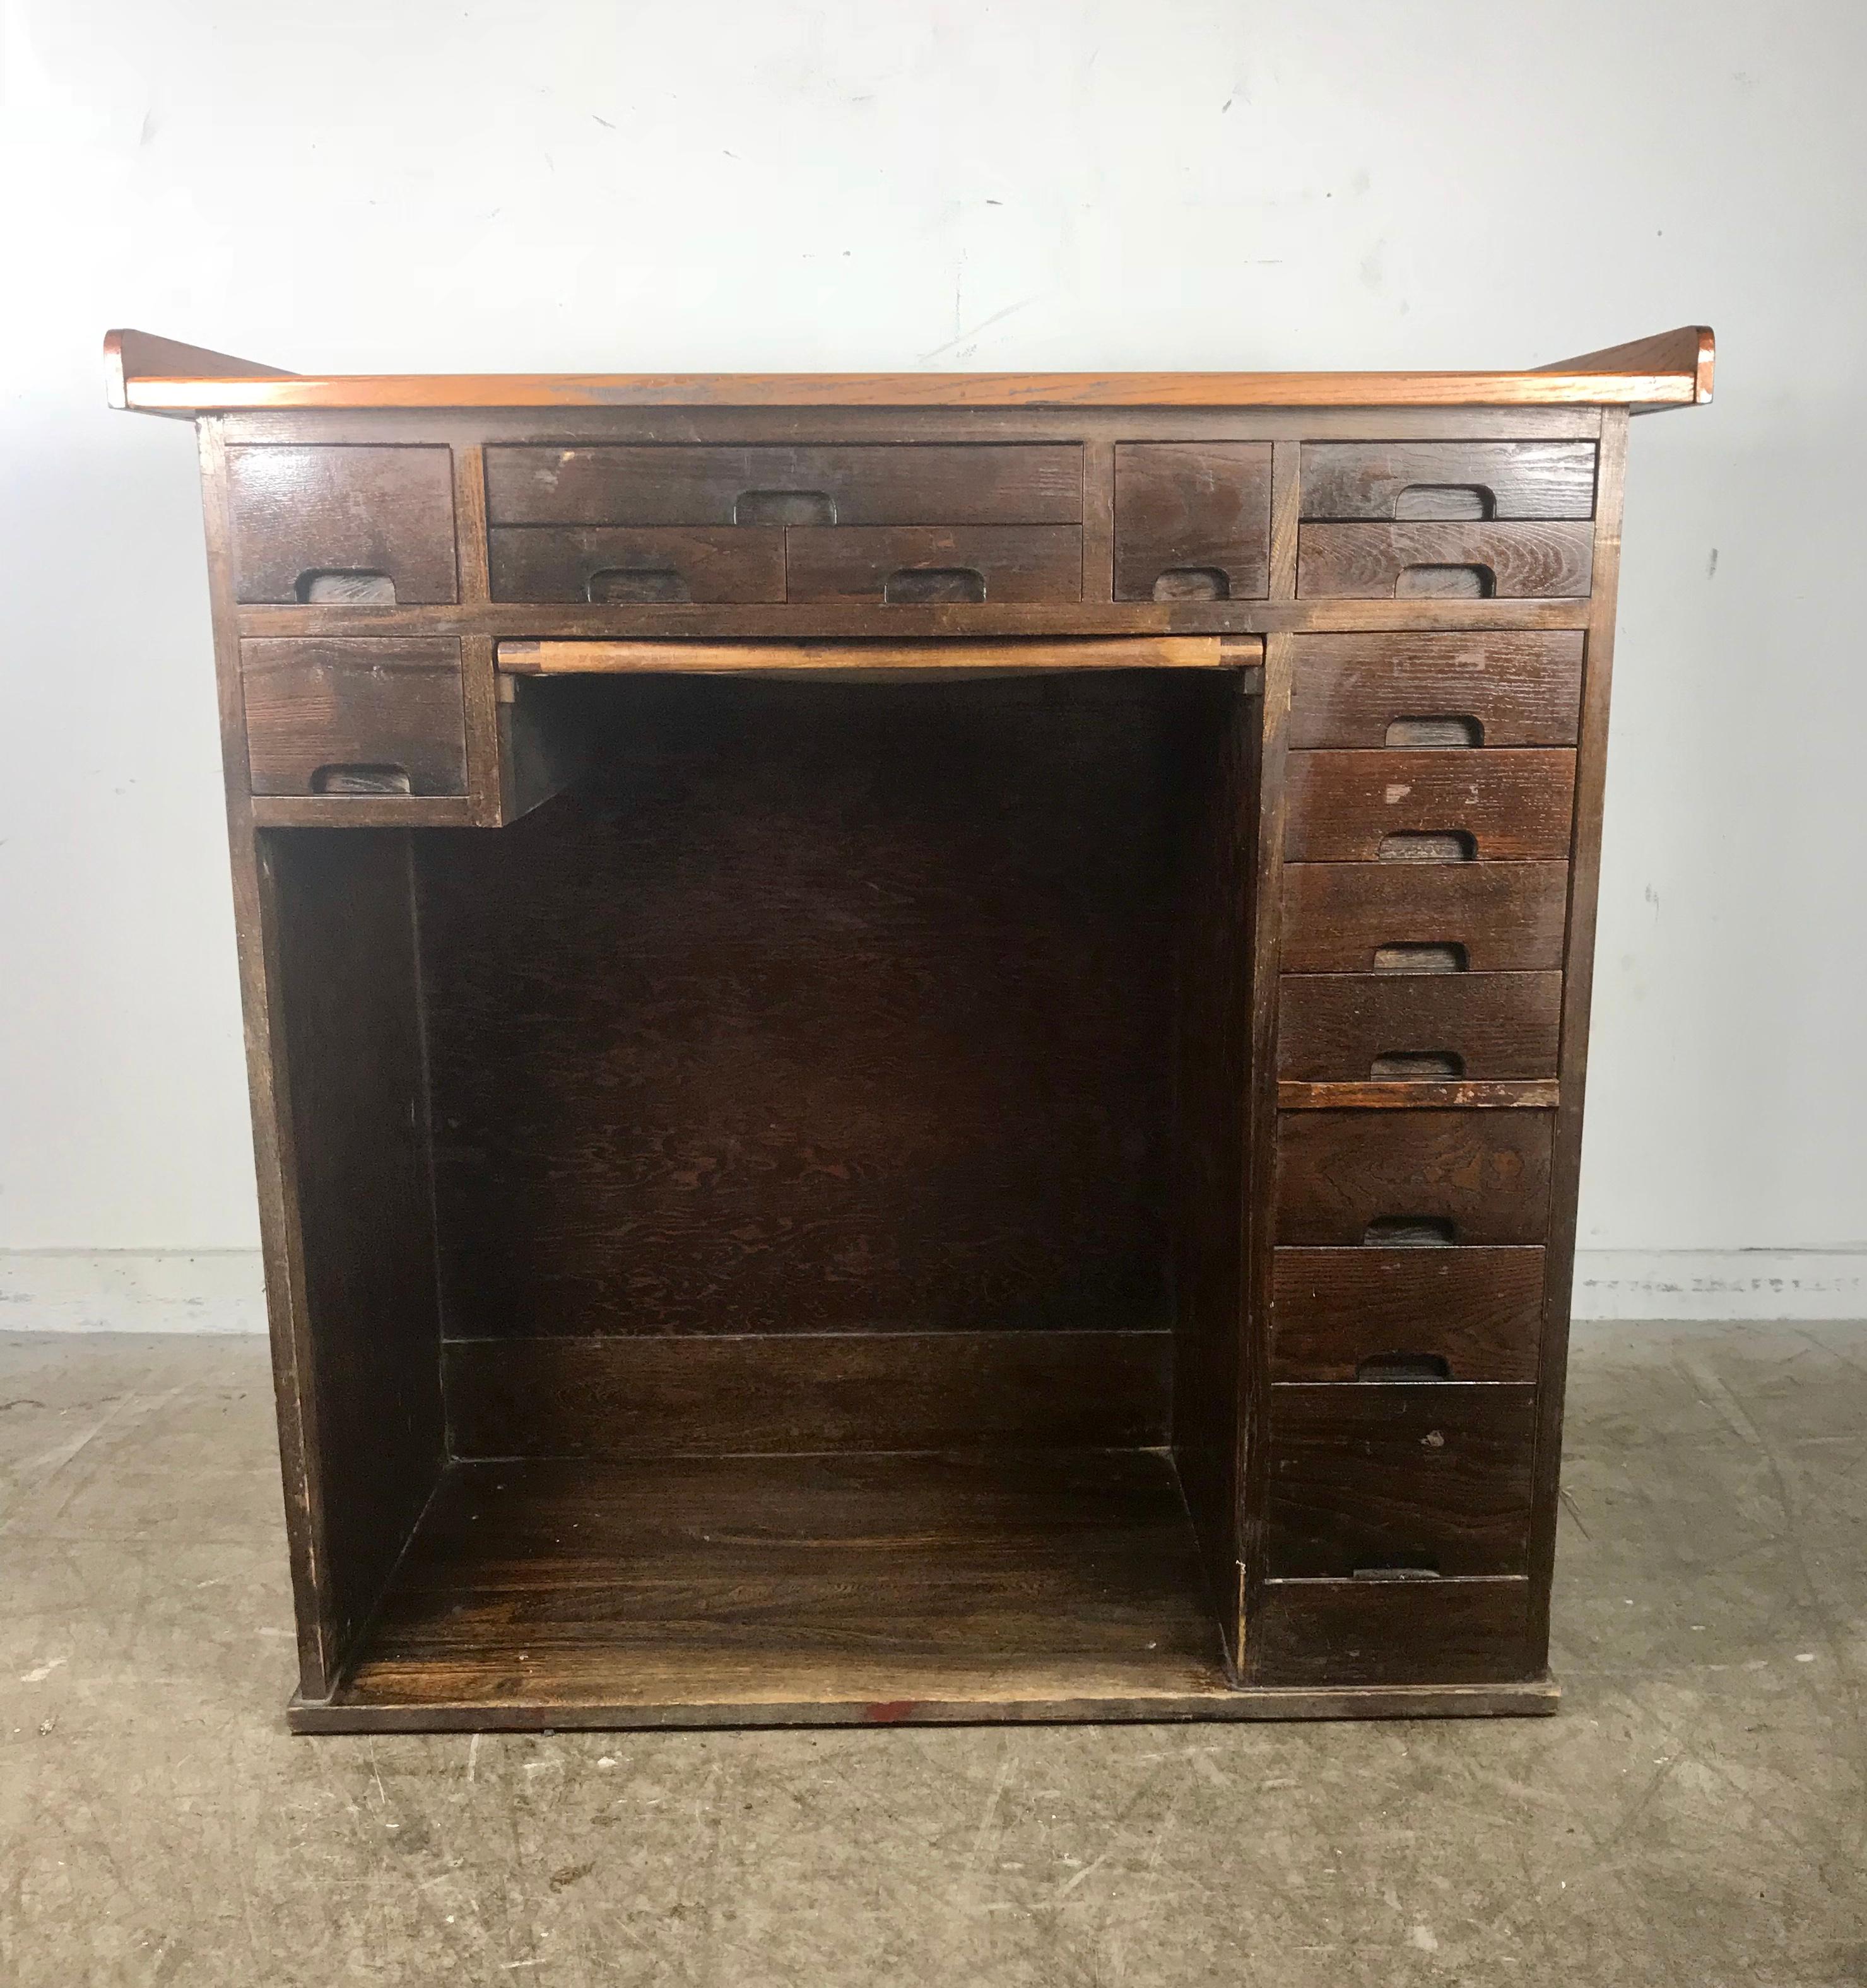 Antique oak multi-drawer jewelers desk, watchmakers work bench by J.H. Rosberg manufacturing co, paneled sides and back, kneehole below three drawer over pull out catch tray with bottom cloth, right side. Nine-drawer, work surface with stains and